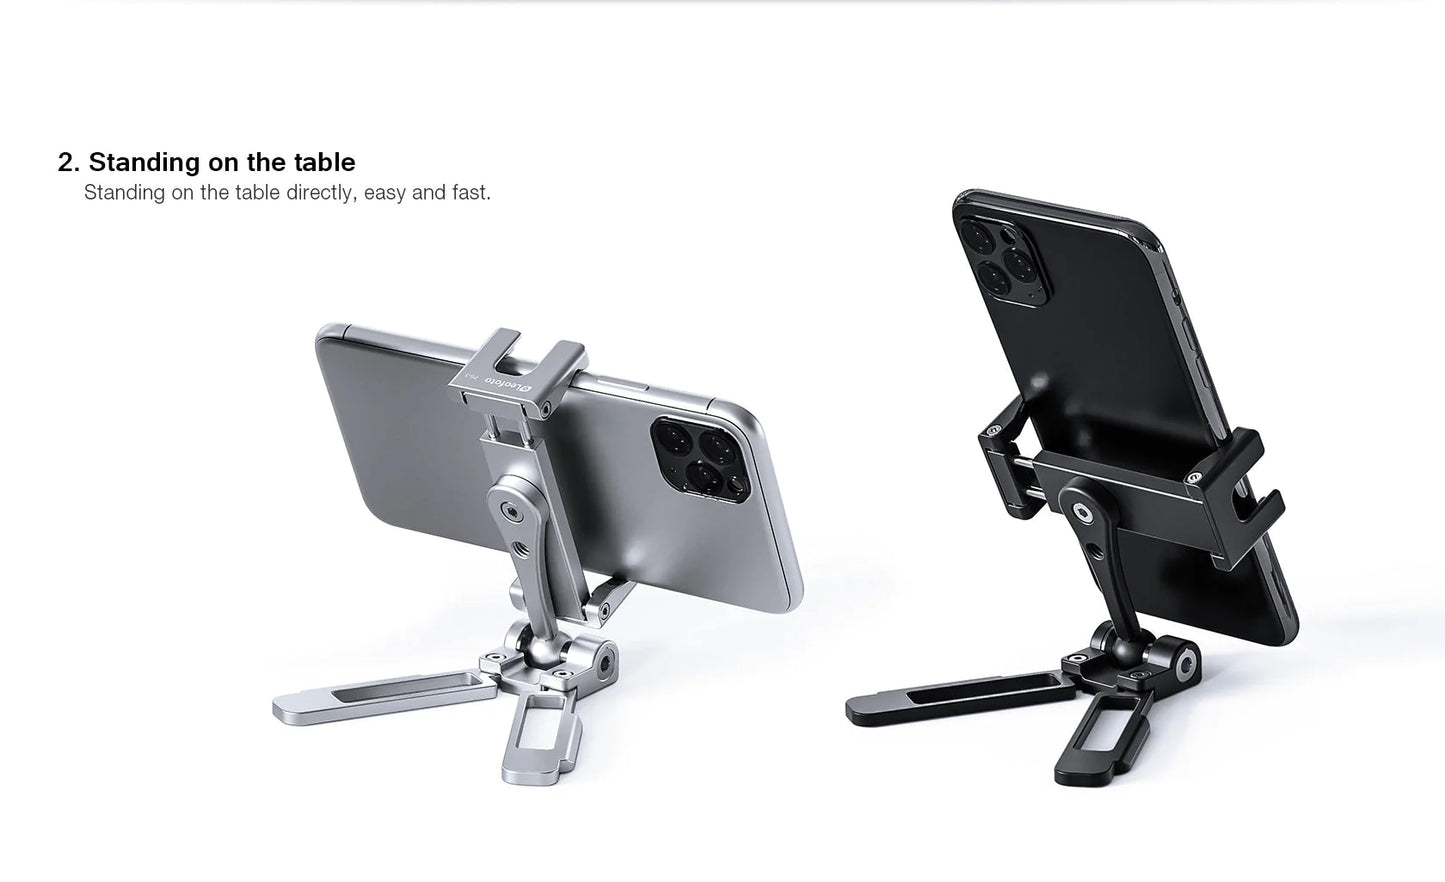 PS-3 Cell Phone Stand Leofoto PS-3 Multi-functional Foldable Cellphone Stand with Arca-Compatible Dovetail and Cold Shoe Mount - Black